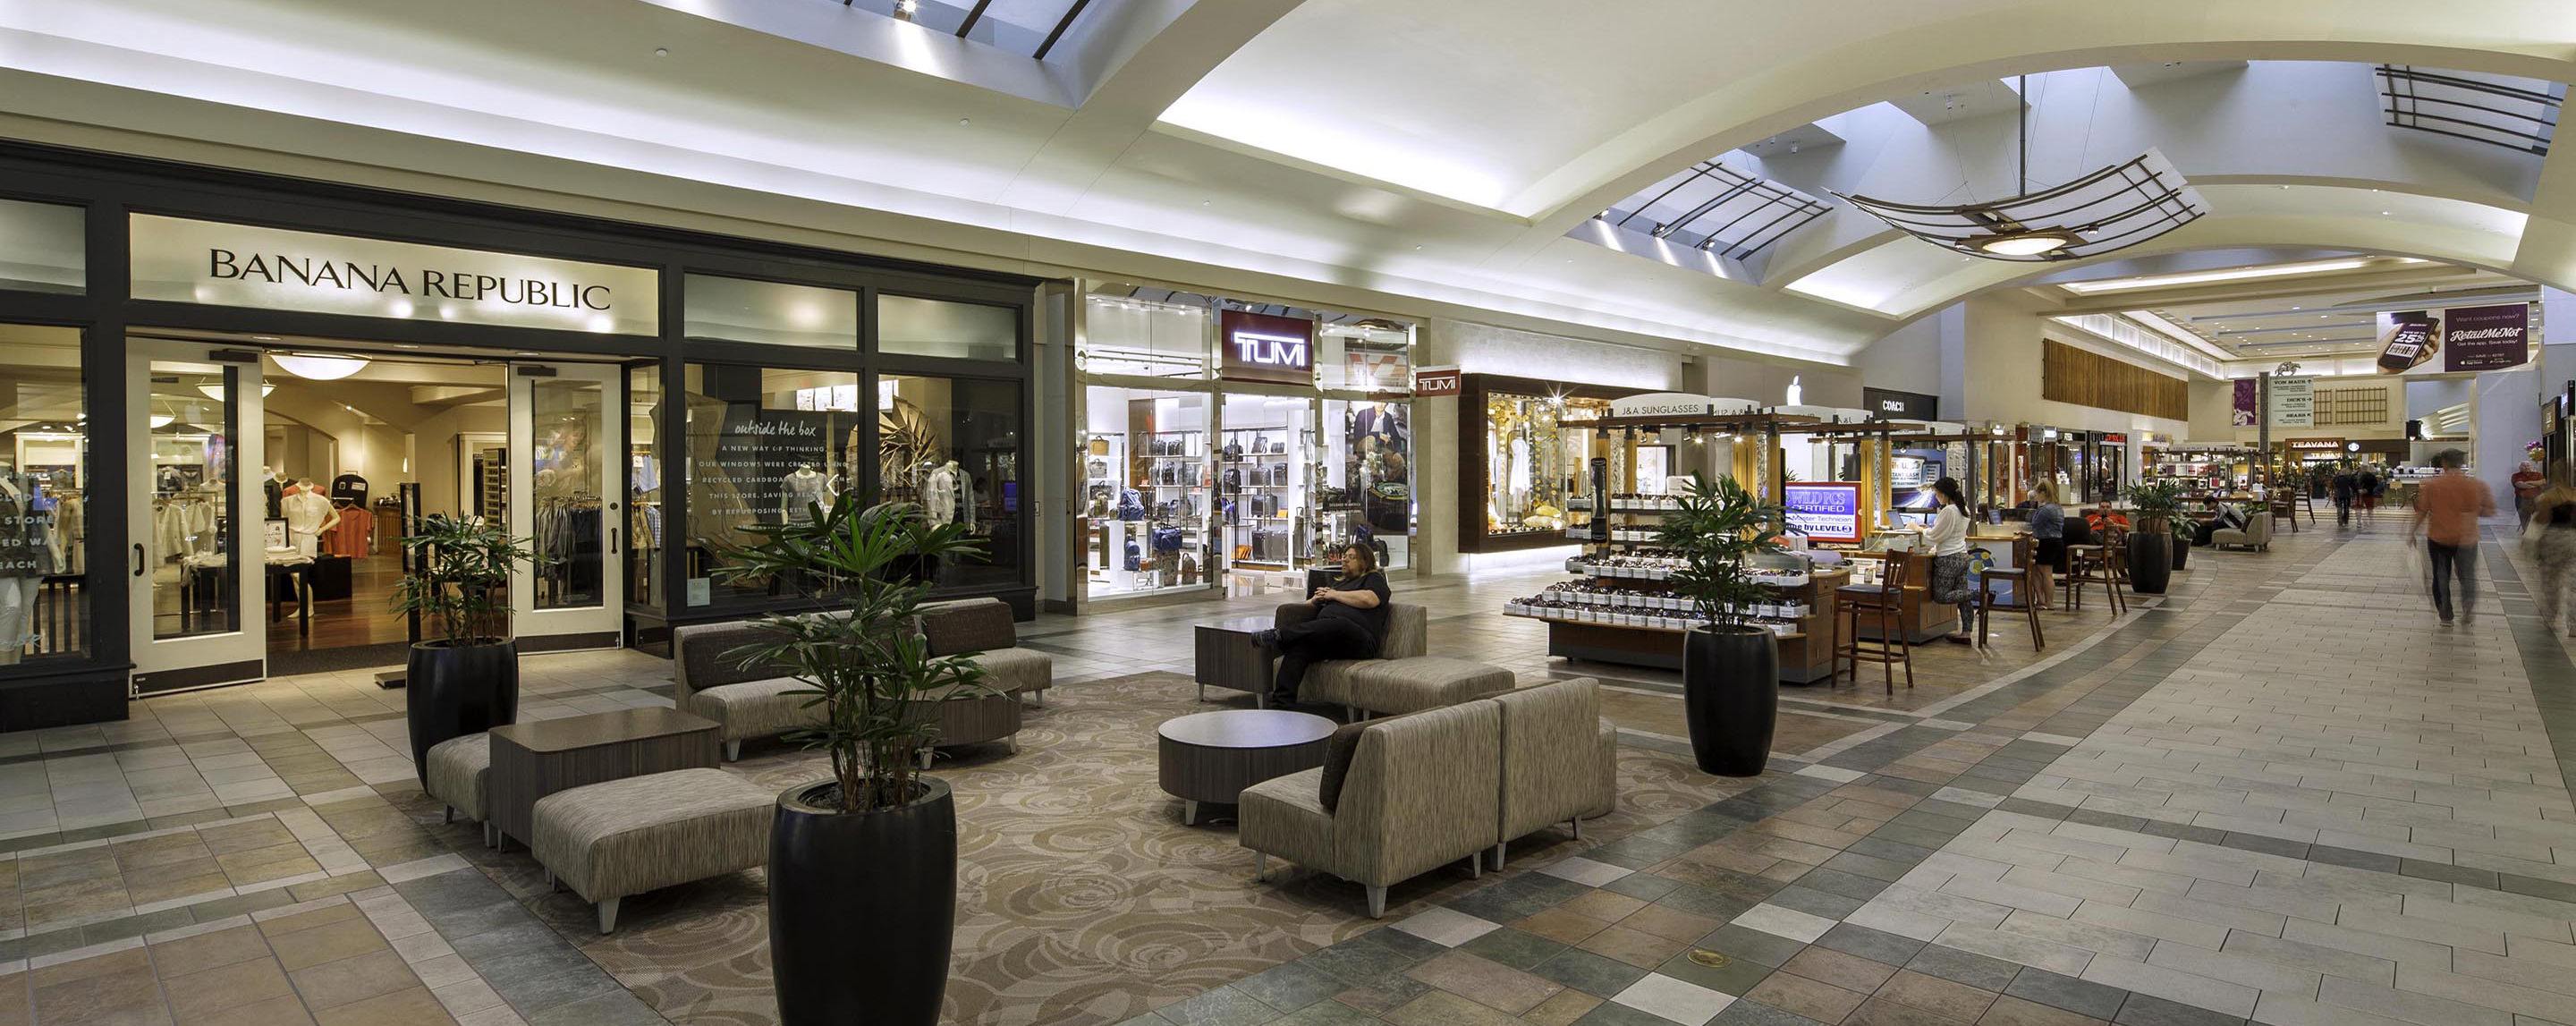 A view of an indoor mall. There are many storefronts, including Tumi, Coach, Von Maur, and Banana Republic.